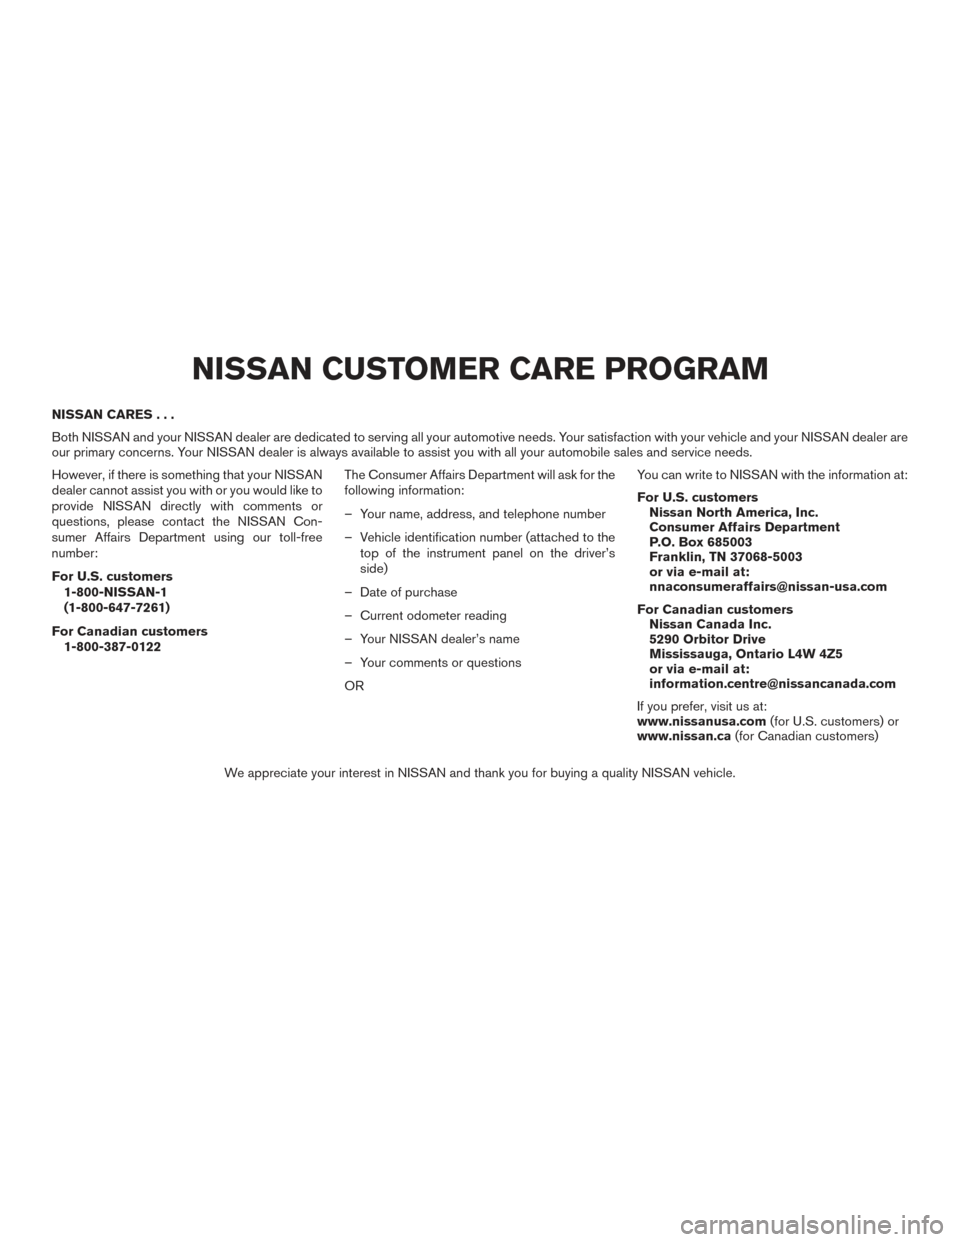 NISSAN MAXIMA 2016 A36 / 8.G Owners Manual NISSAN CARES...
Both NISSAN and your NISSAN dealer are dedicated to serving all your automotive needs. Your satisfaction with your vehicle and your NISSAN dealer are
our primary concerns. Your NISSAN 